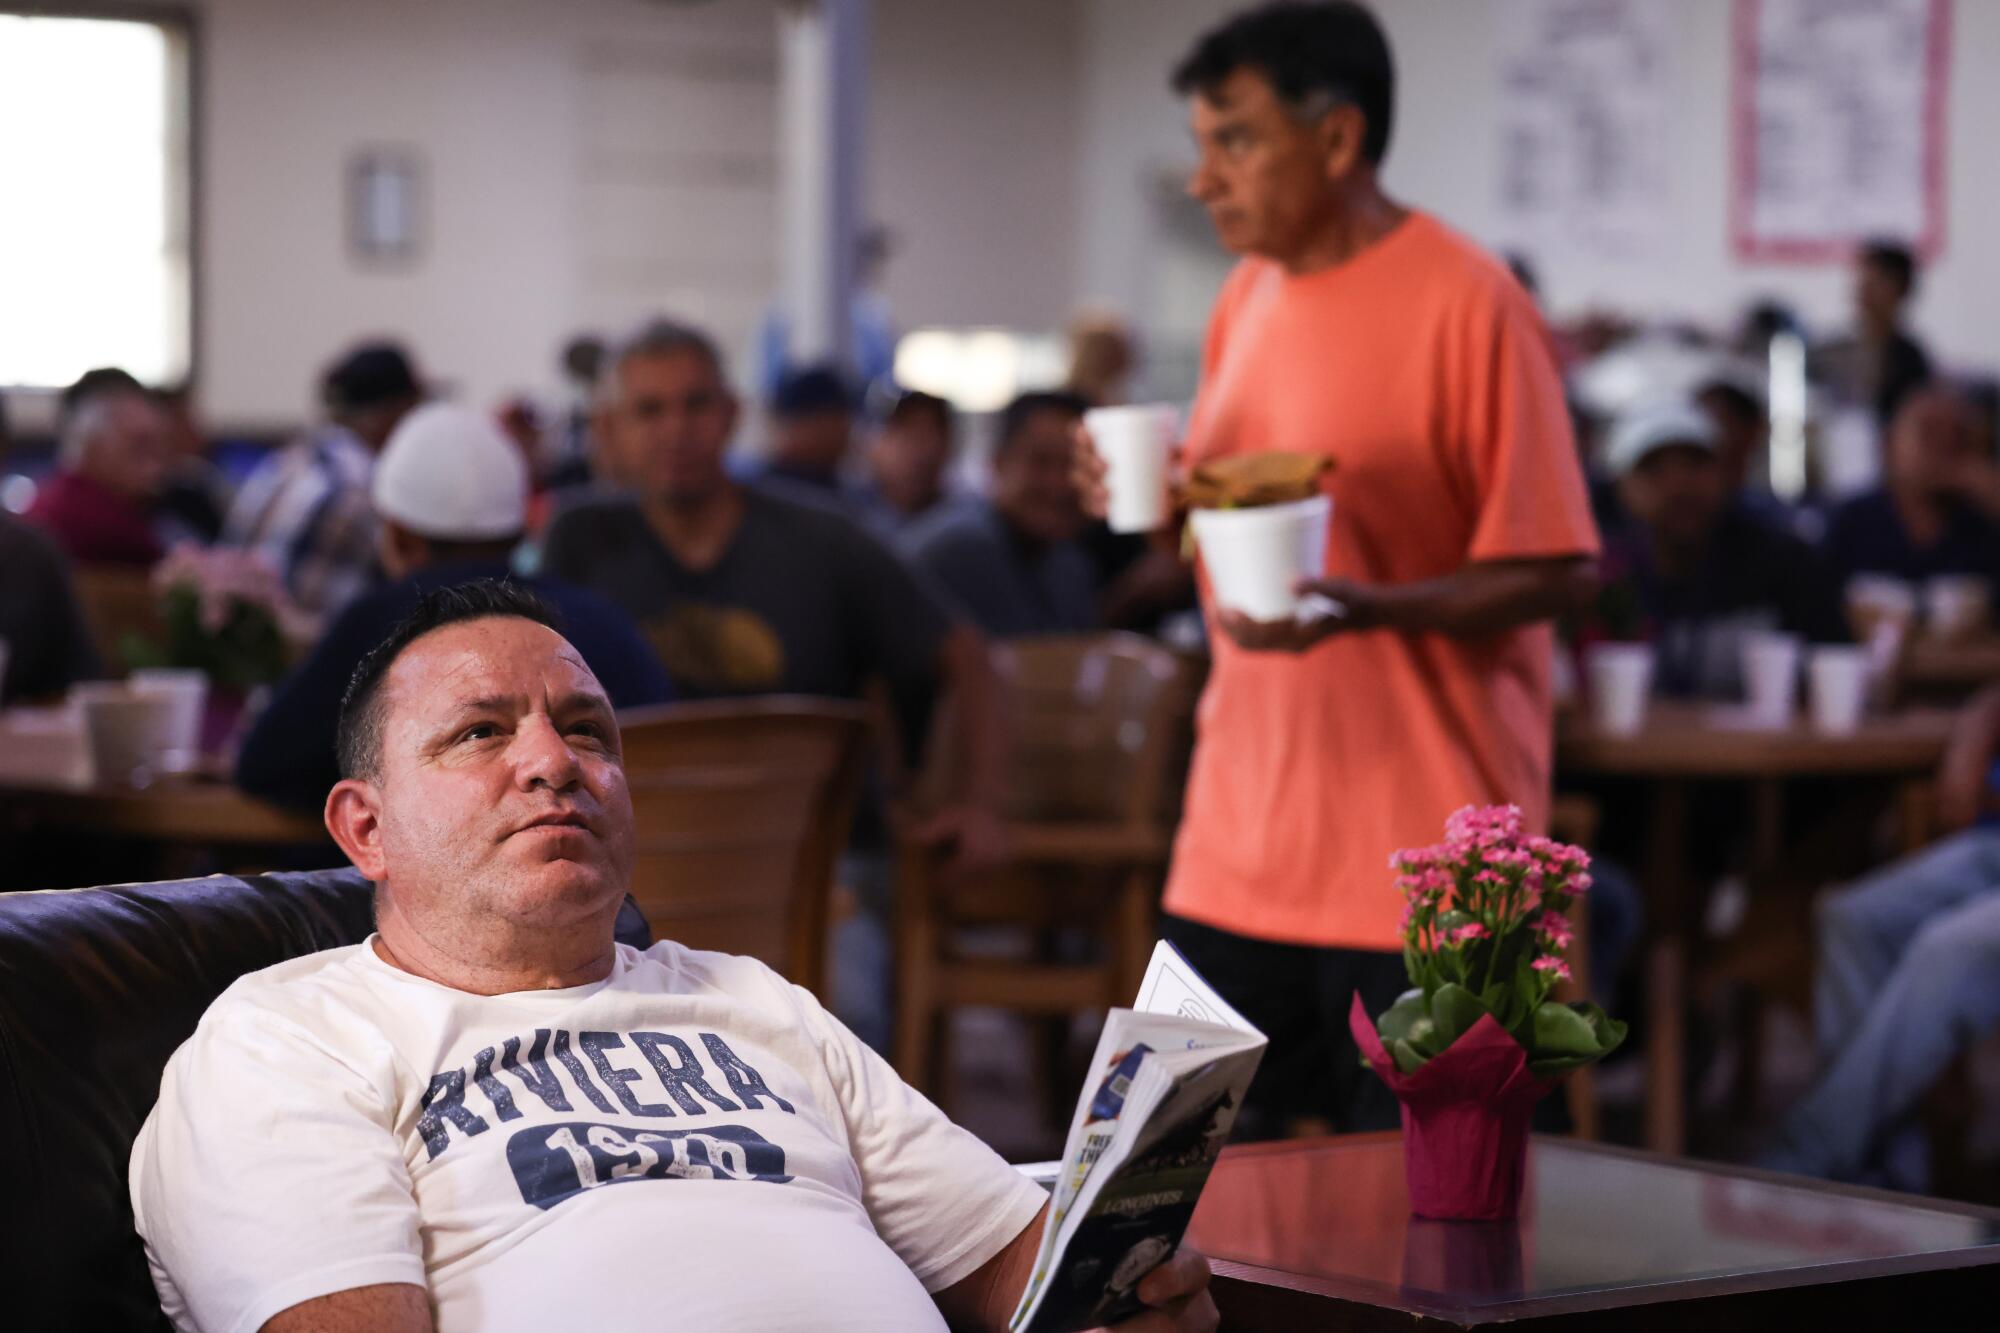 Rudy Cruz, an assistant foreman for trainer Phil D'Amato, left, watches a race as others eat their meals.